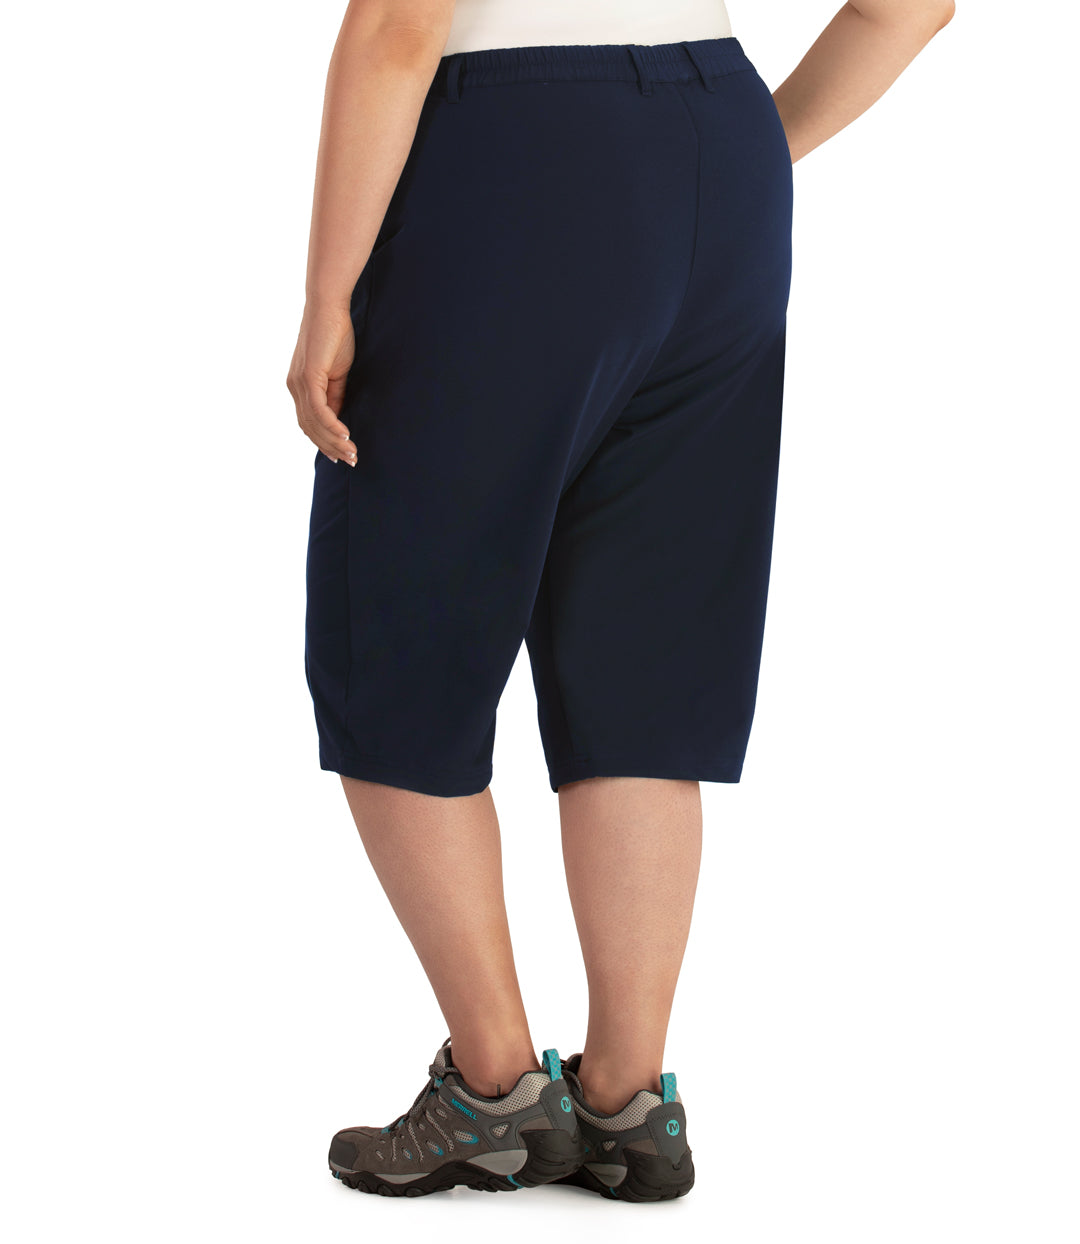 Bottom half of plus sized woman, back view, wearing JunoActive Hiking and Travel Short in color navy. Bottom hem is just below the knee. She is wearing hiking sneakers.